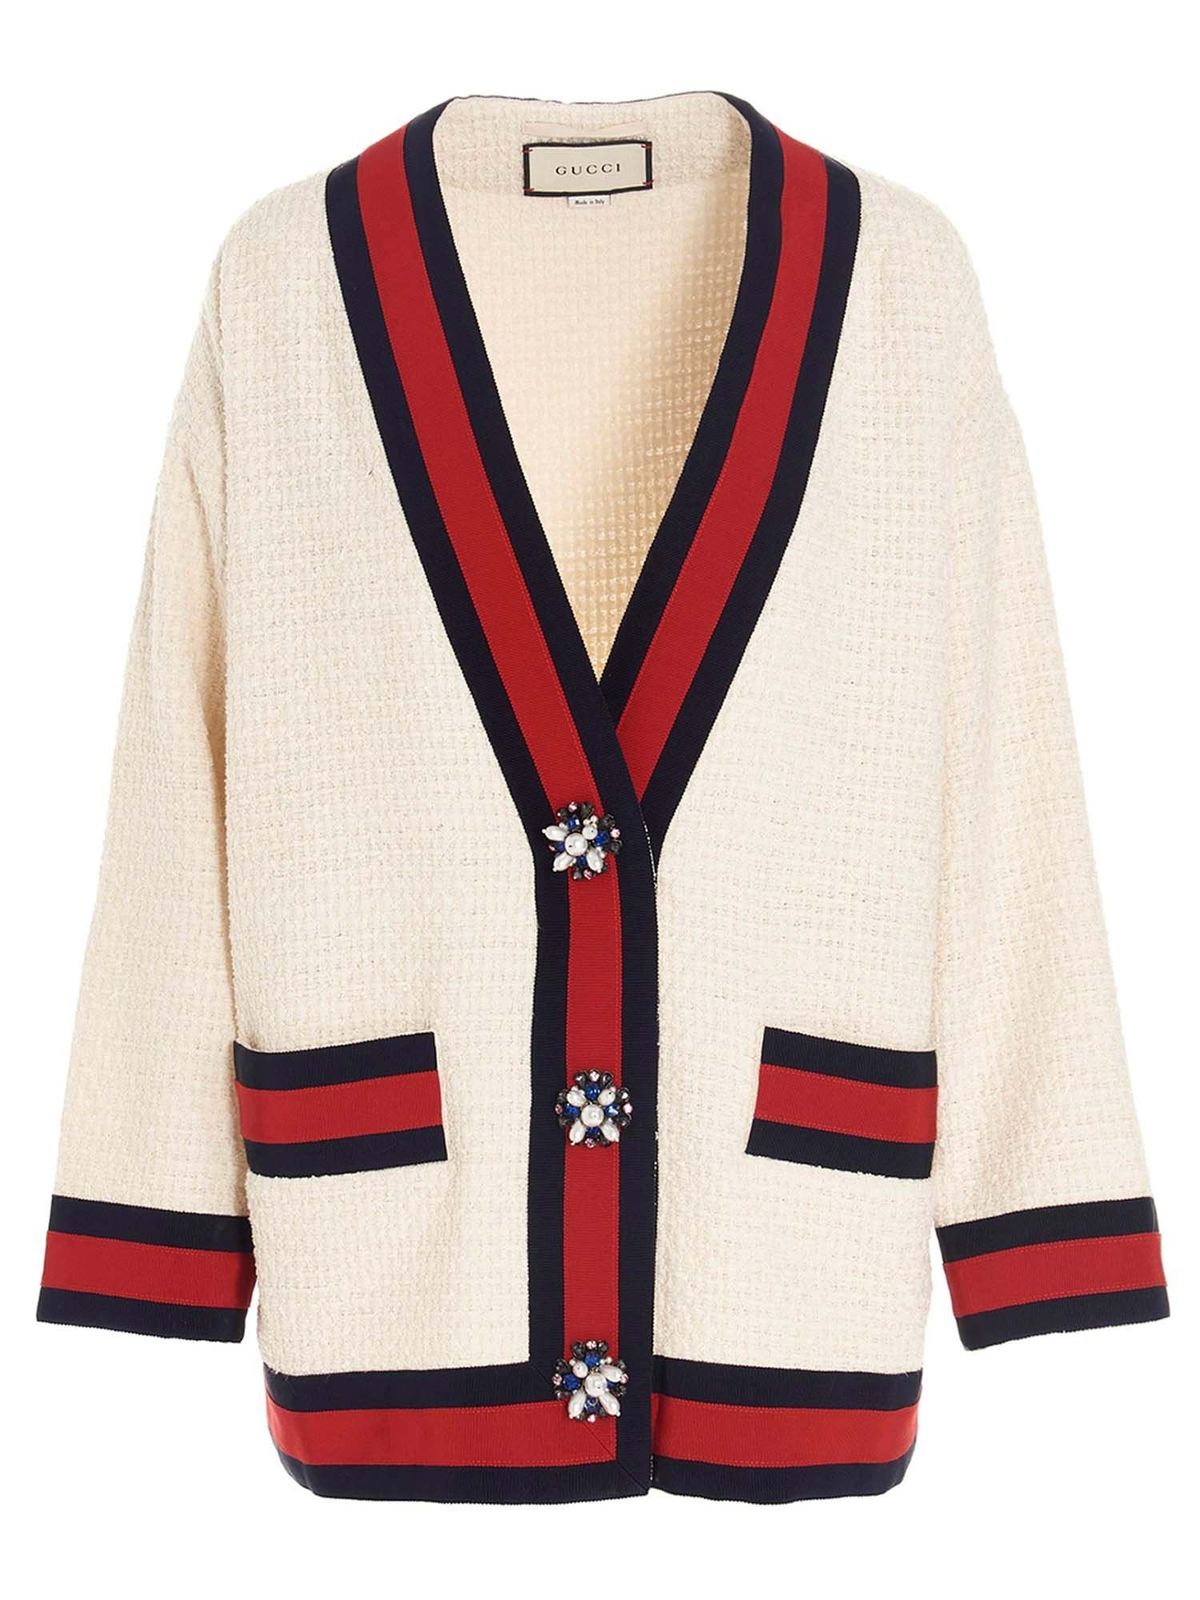 GUCCI RED AND BLACK DETAILS CARDIGAN IN WHITE